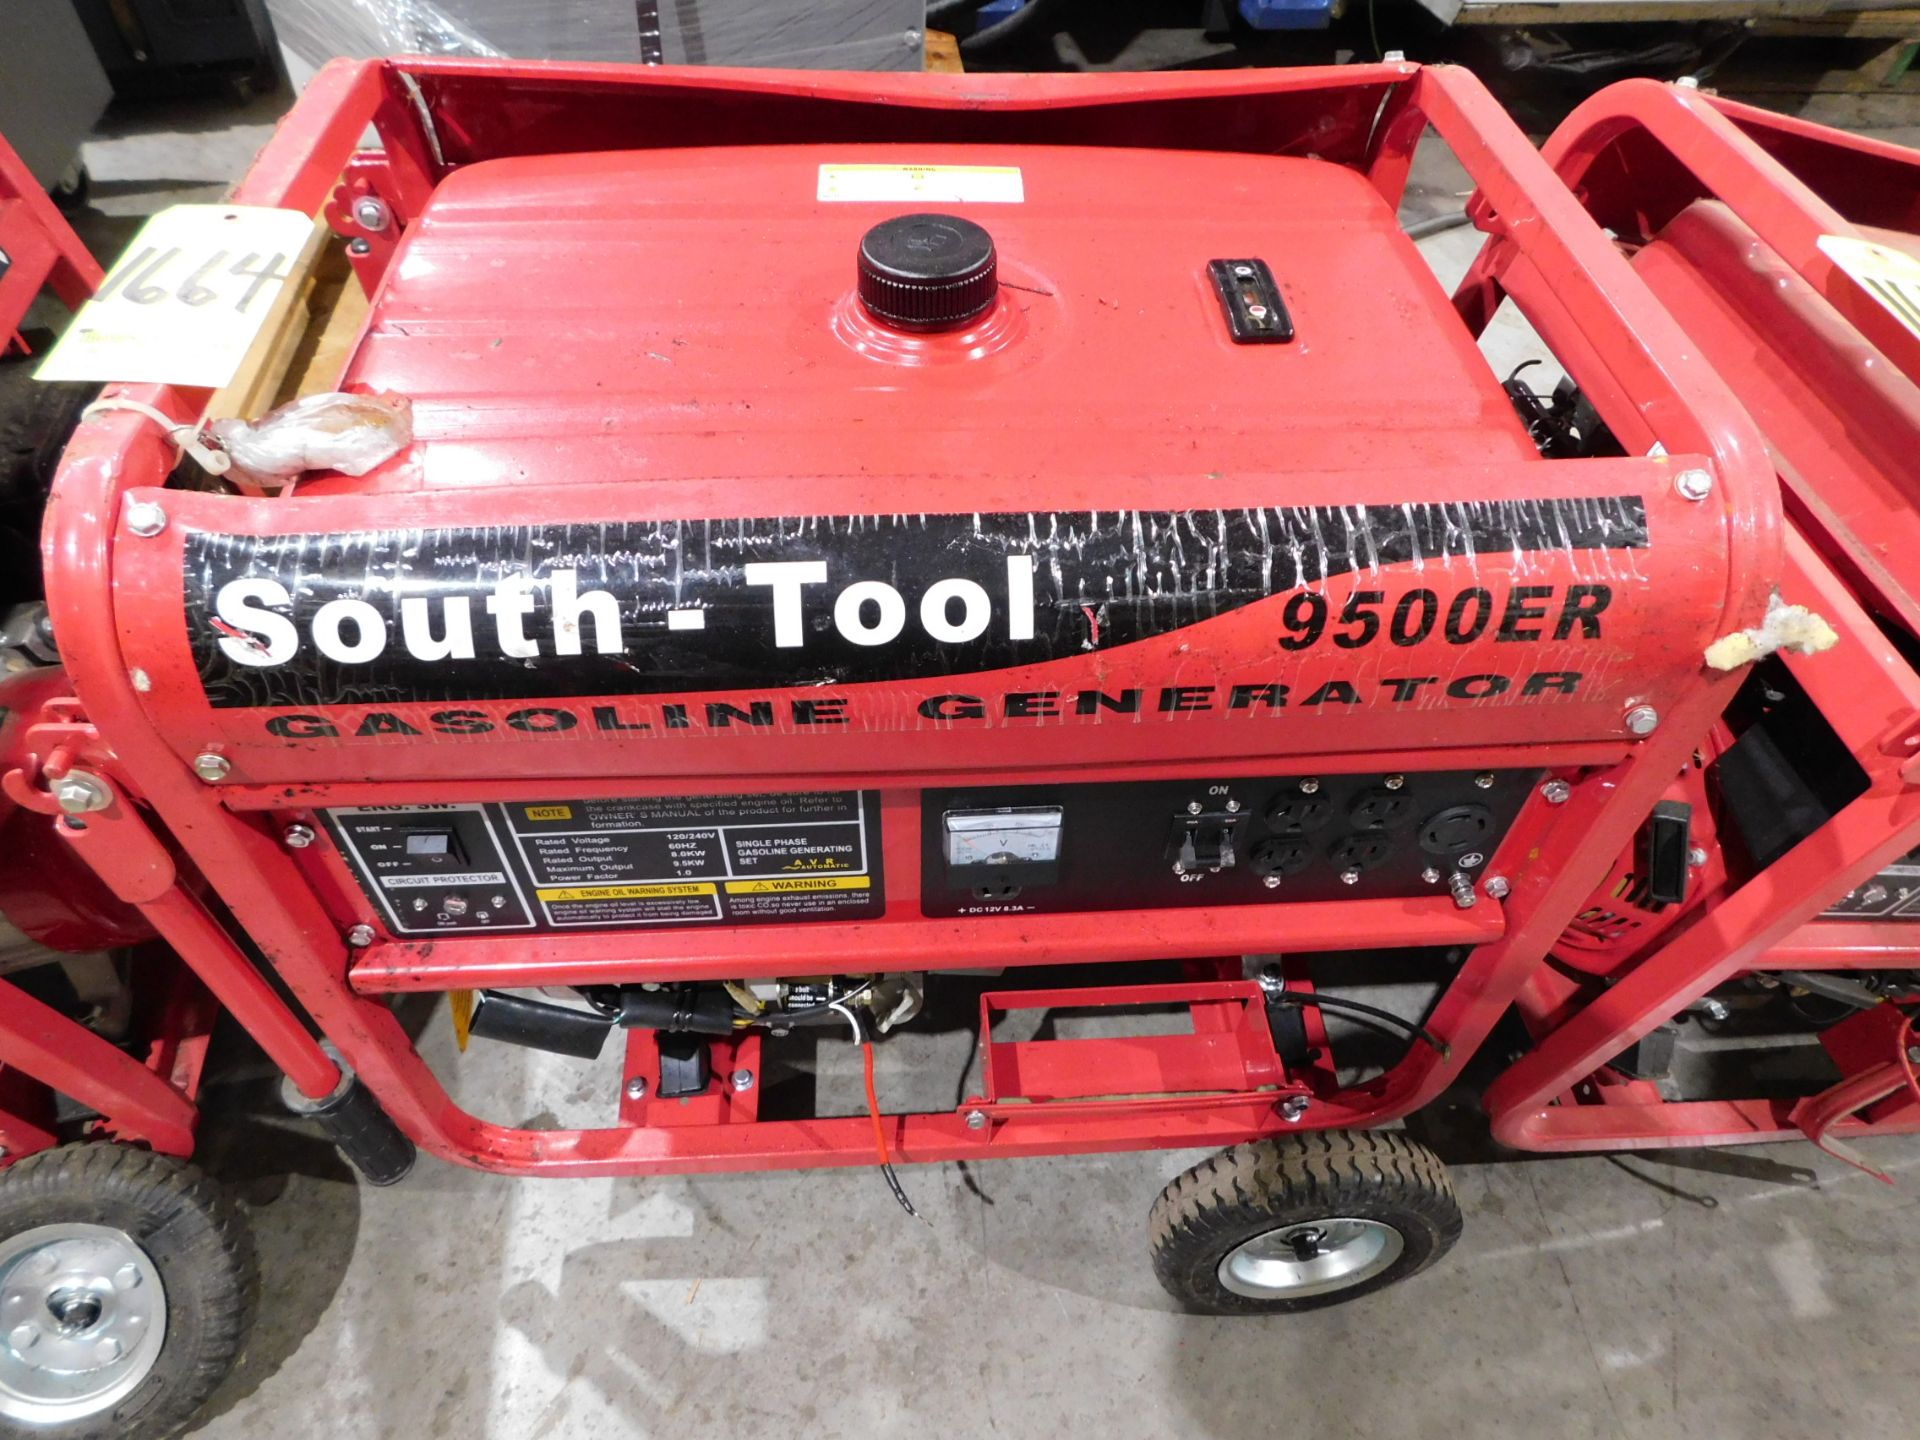 South Tool Model 9500 ER Gas Powered Generator, 9500 Max Watts, 15 H.P. Condition Unknown